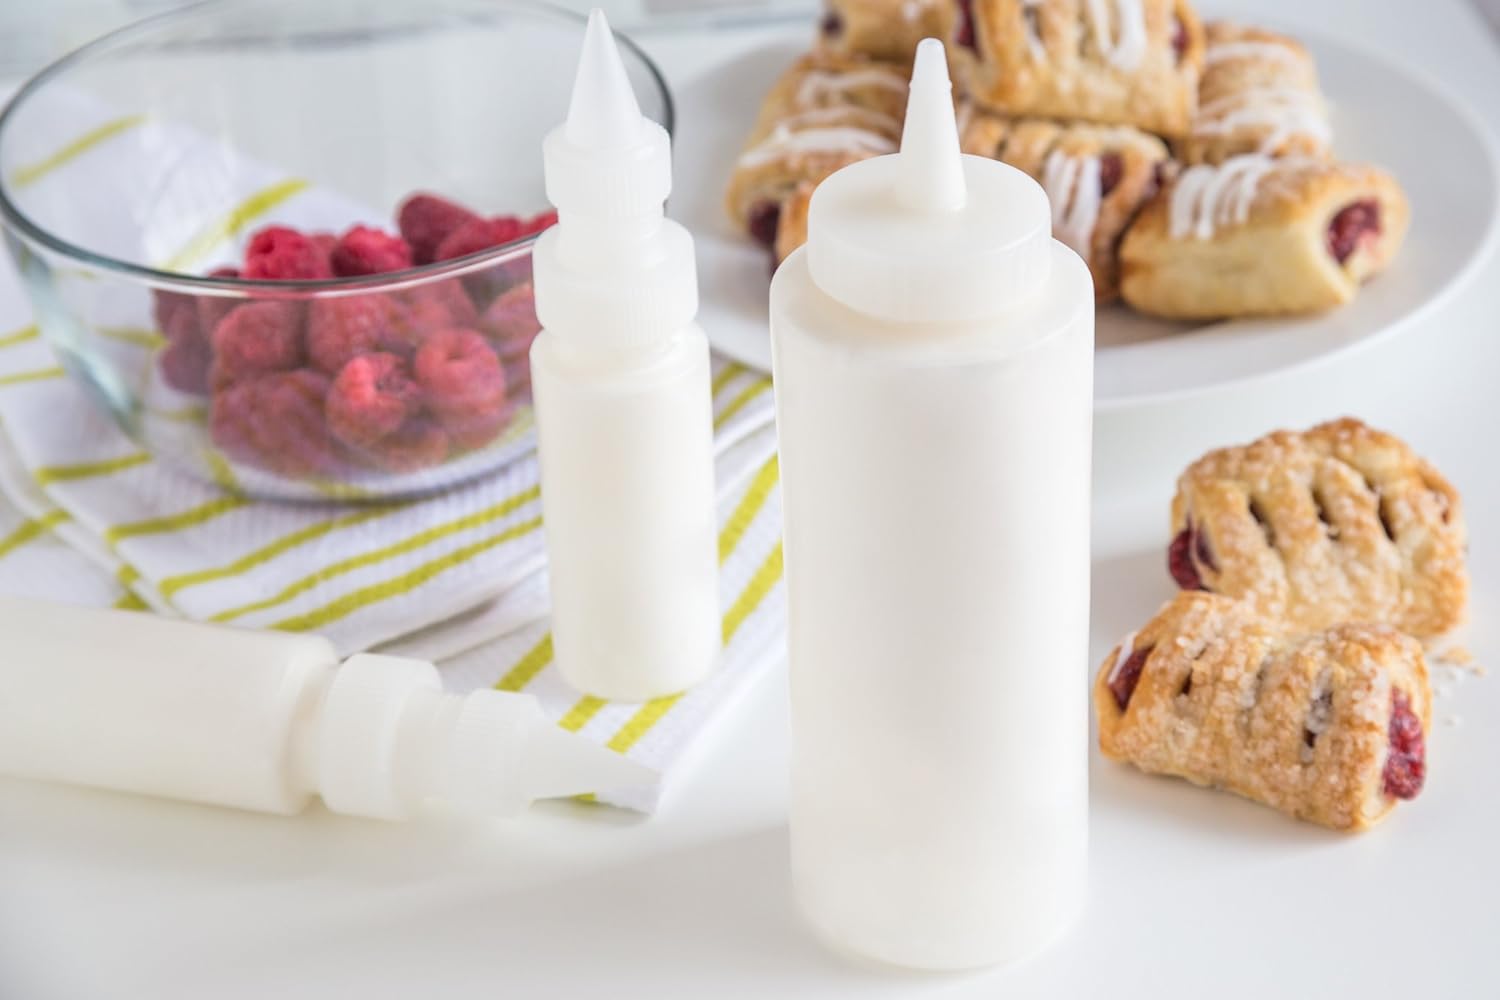 Set of 3 Squeeze/Icing Bottles